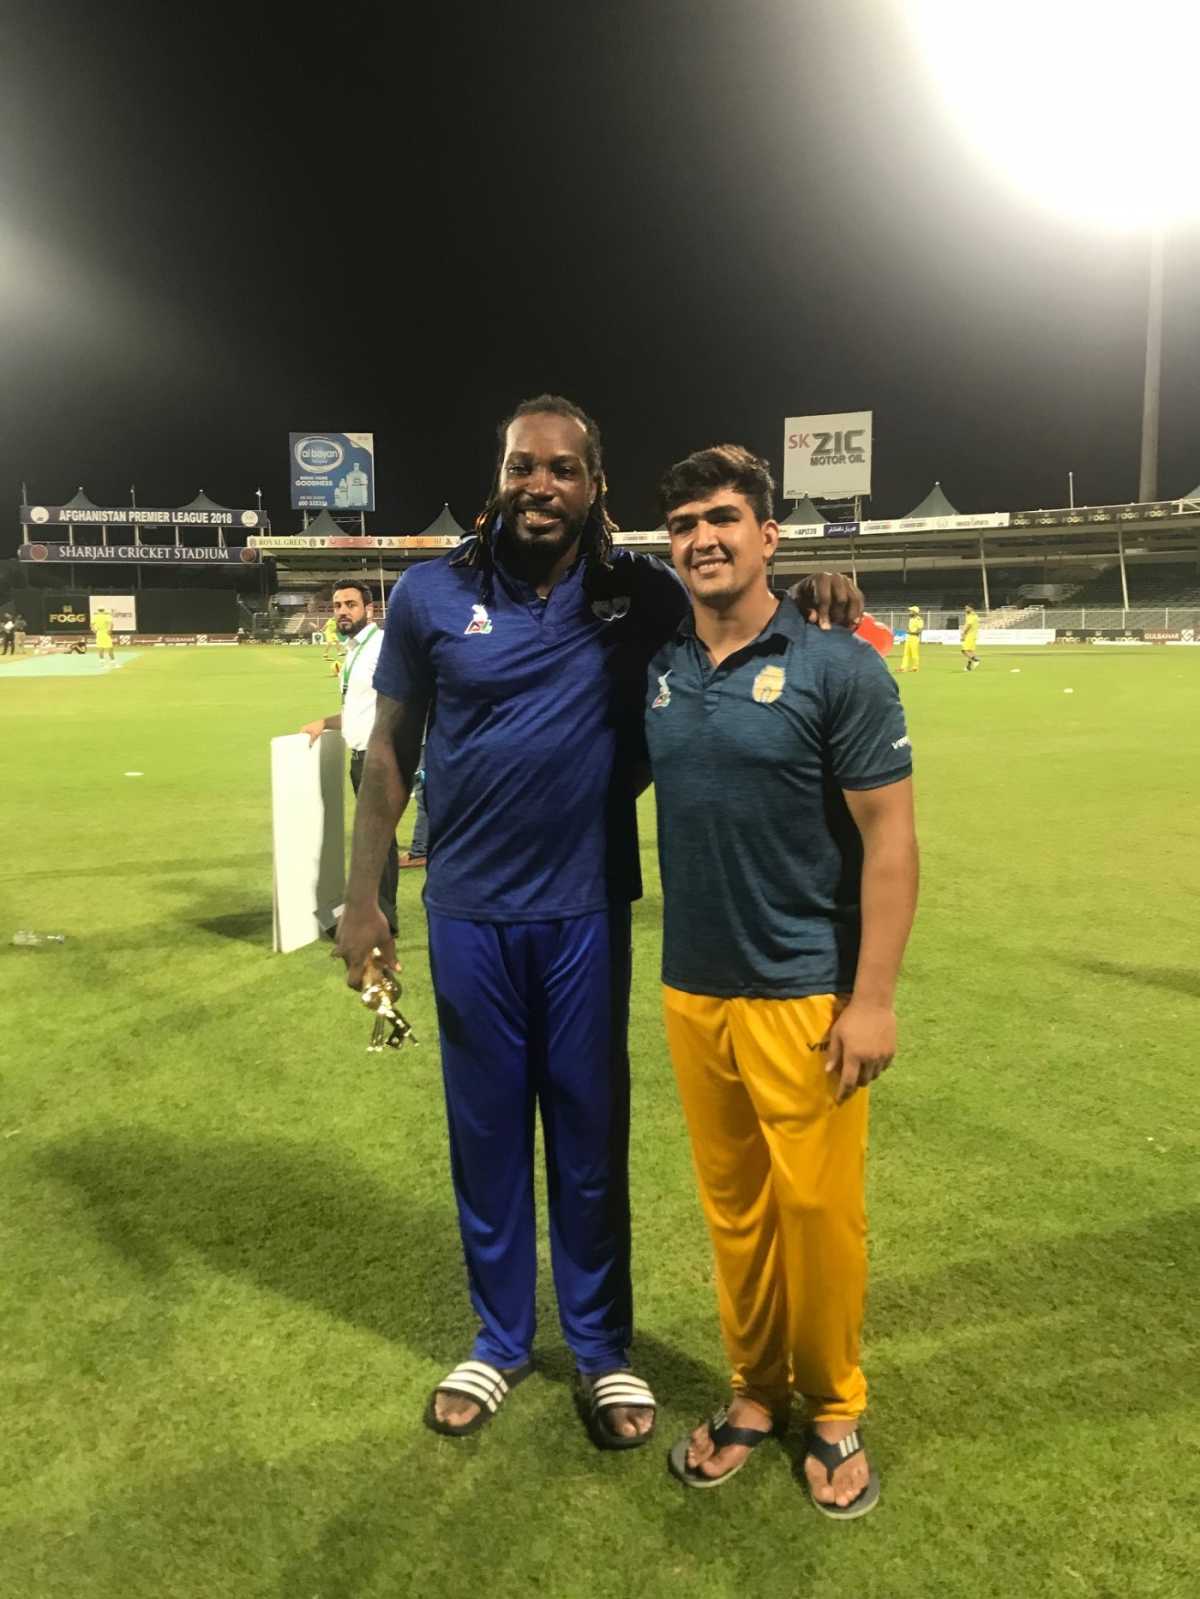 Hazratullah Zazai and his idol Chris Gayle come together for a photo, Balkh Legends v Kabul Zwanan, APL 2018, Sharjah, October 14, 2018